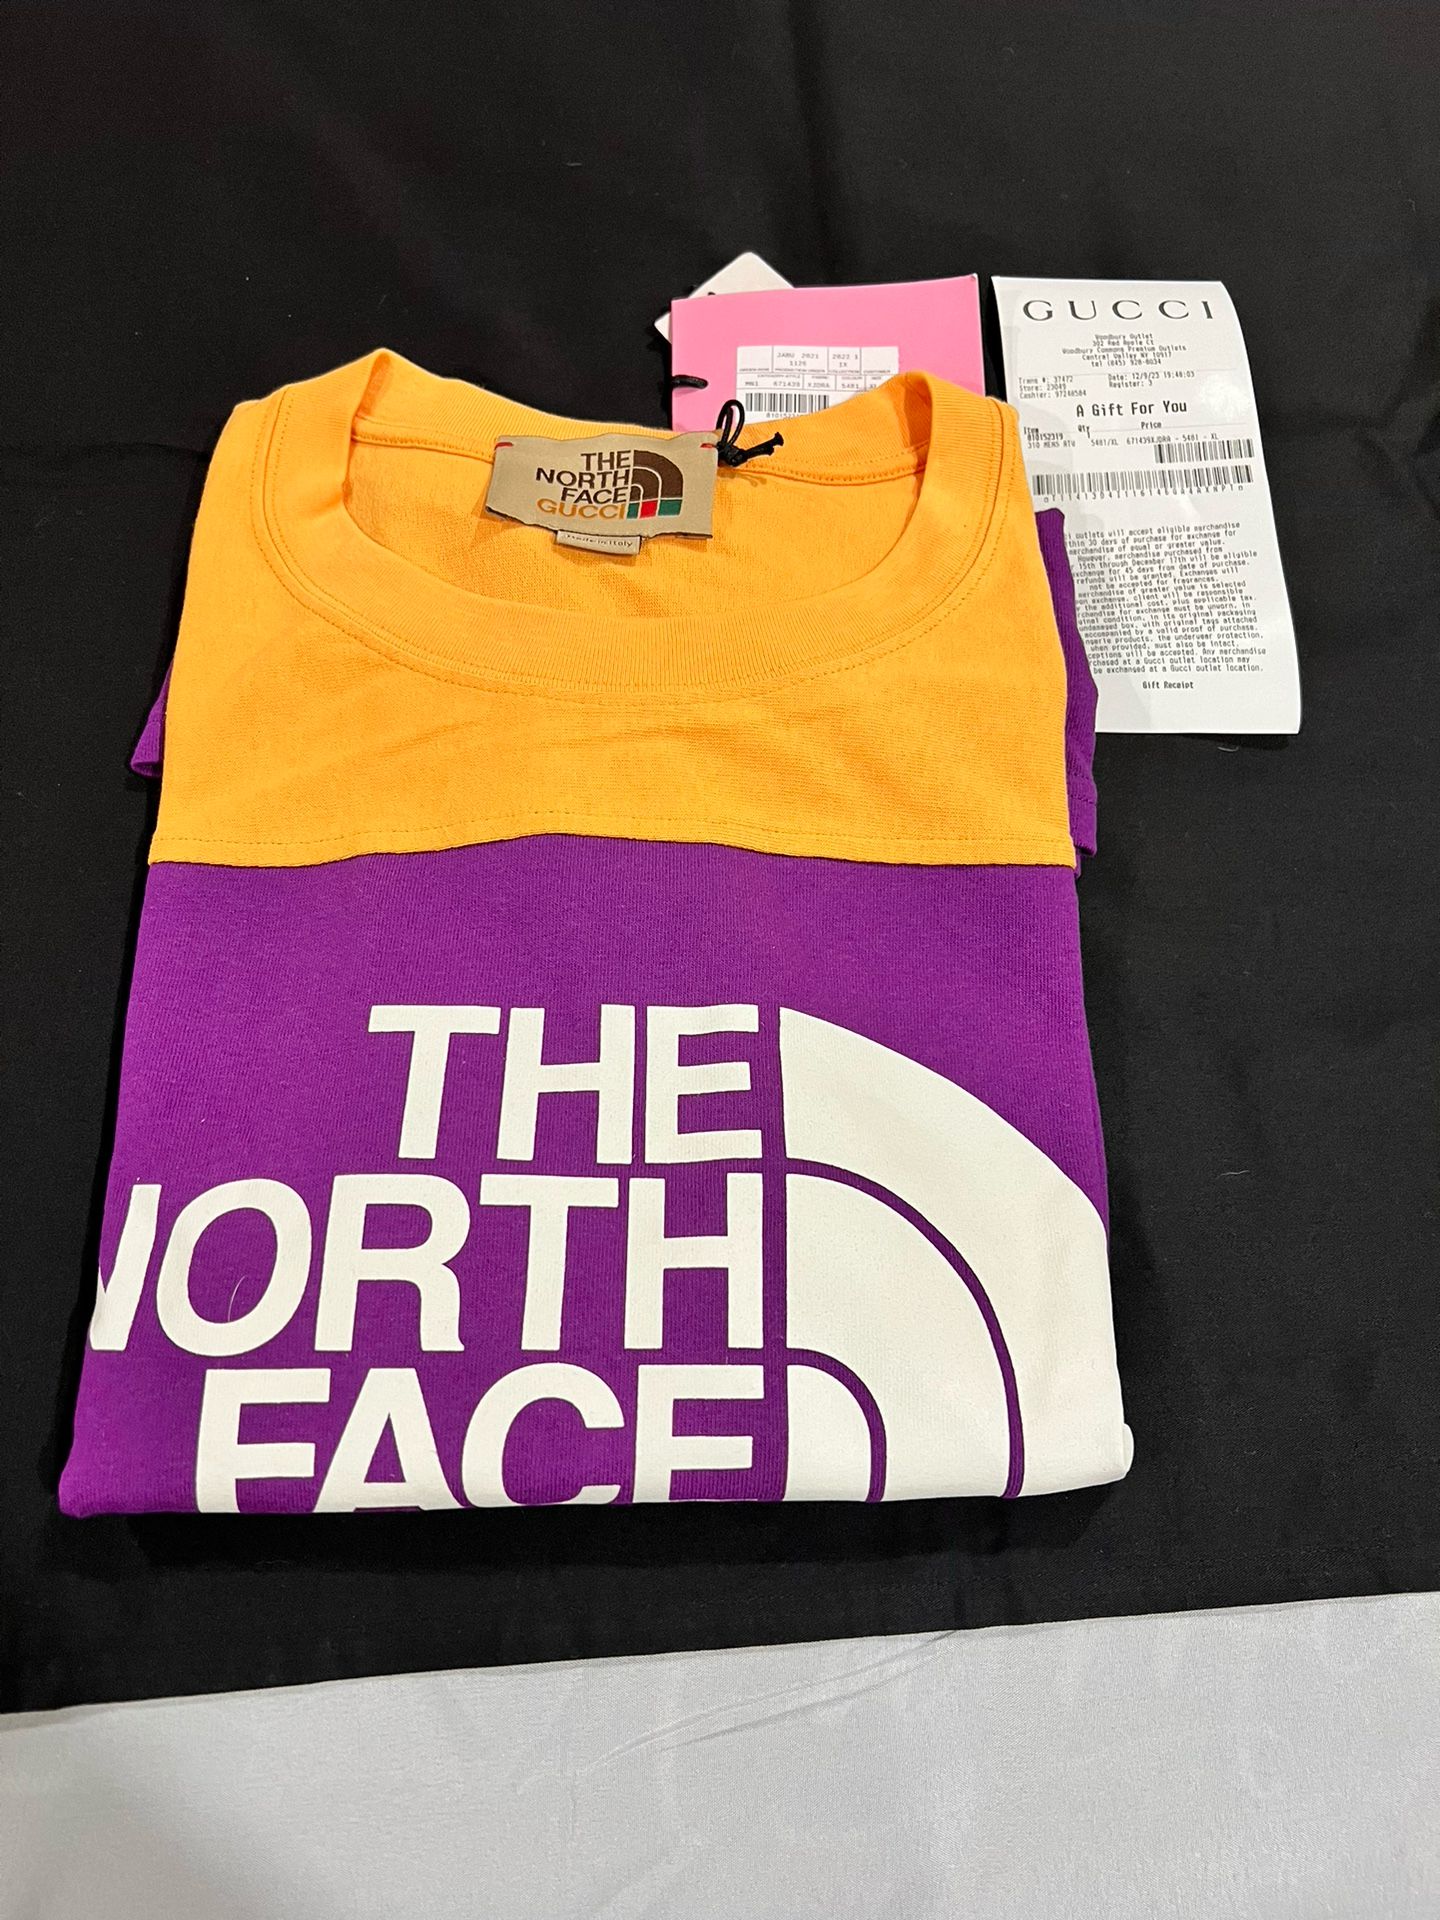 110% Authentic Men's The North Face X GUCCI Purple/Yellow Cotton Jersey Logo T-Shirt Size XLARGE NEW w/ Receipt From Gucci as Shown in Pictures RETAIL